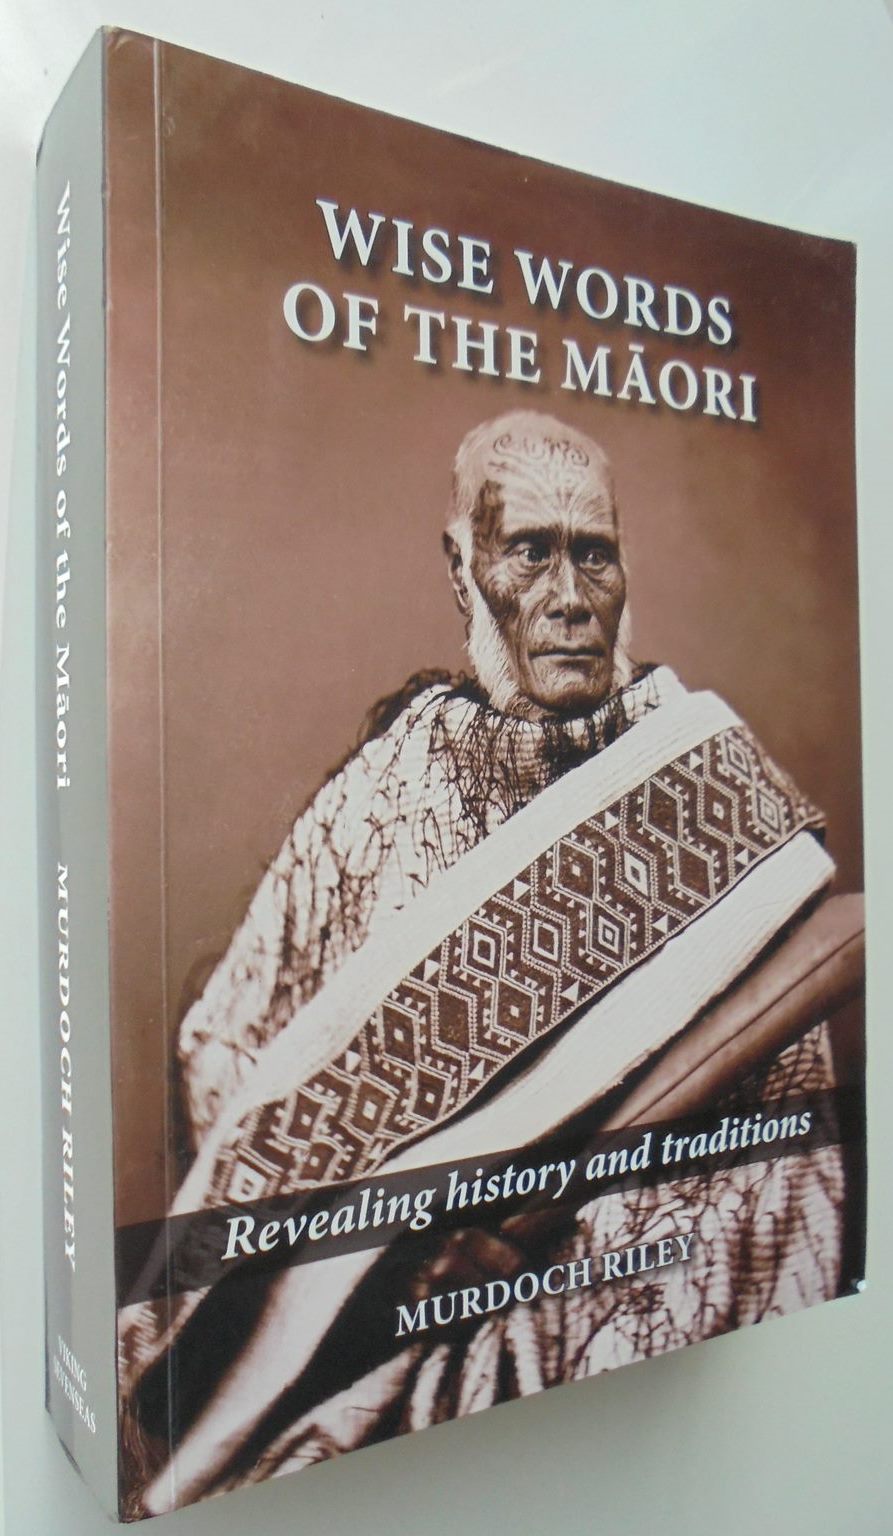 Wise Words of the Maori Revealing History and Traditions By Murdoch Riley.